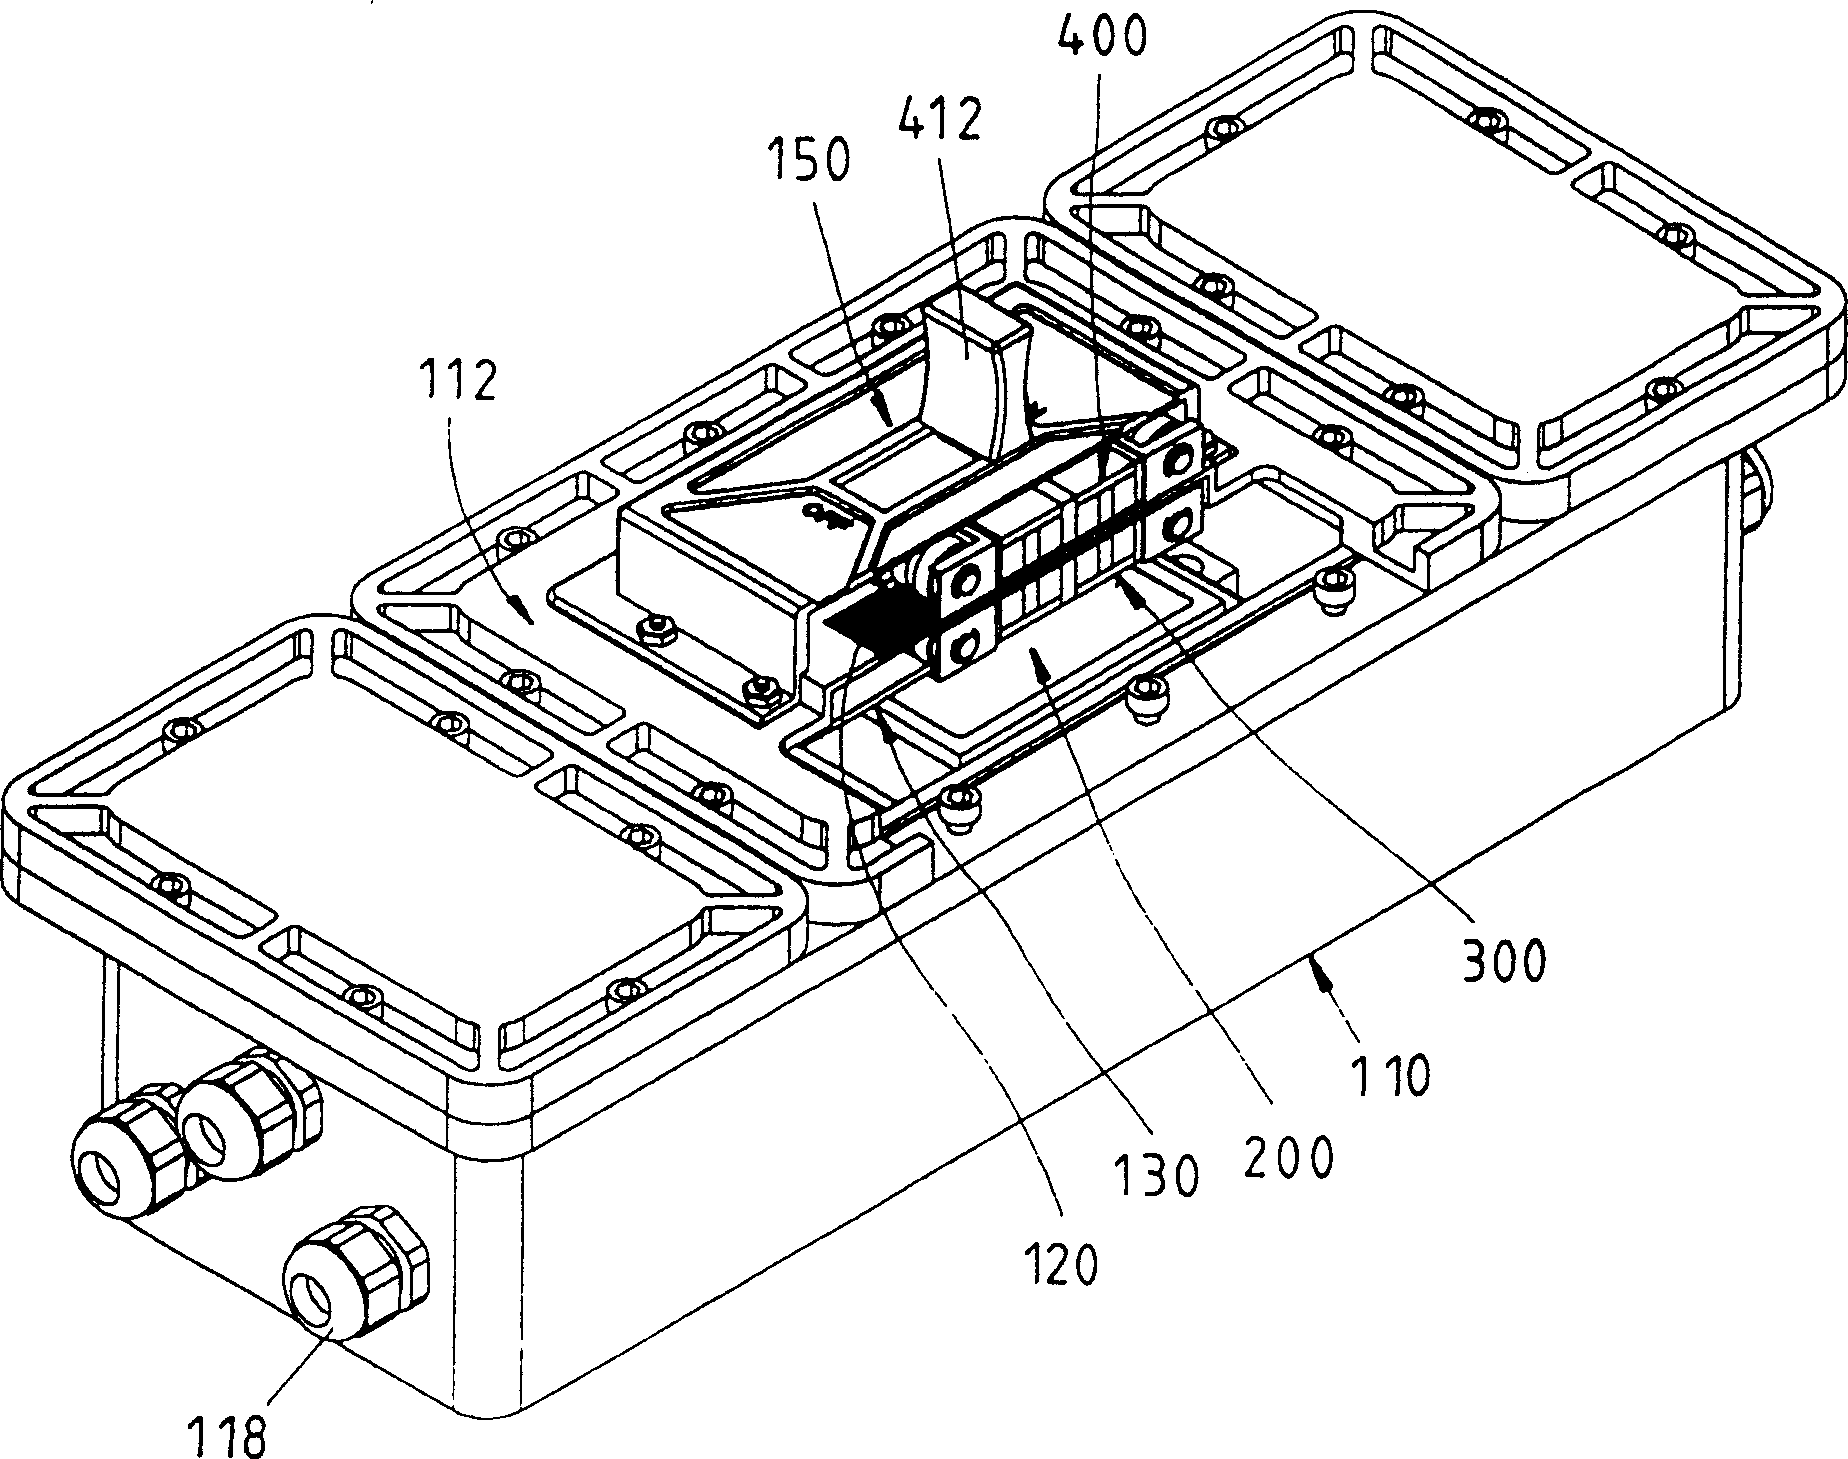 Closed type electrical switch assembly